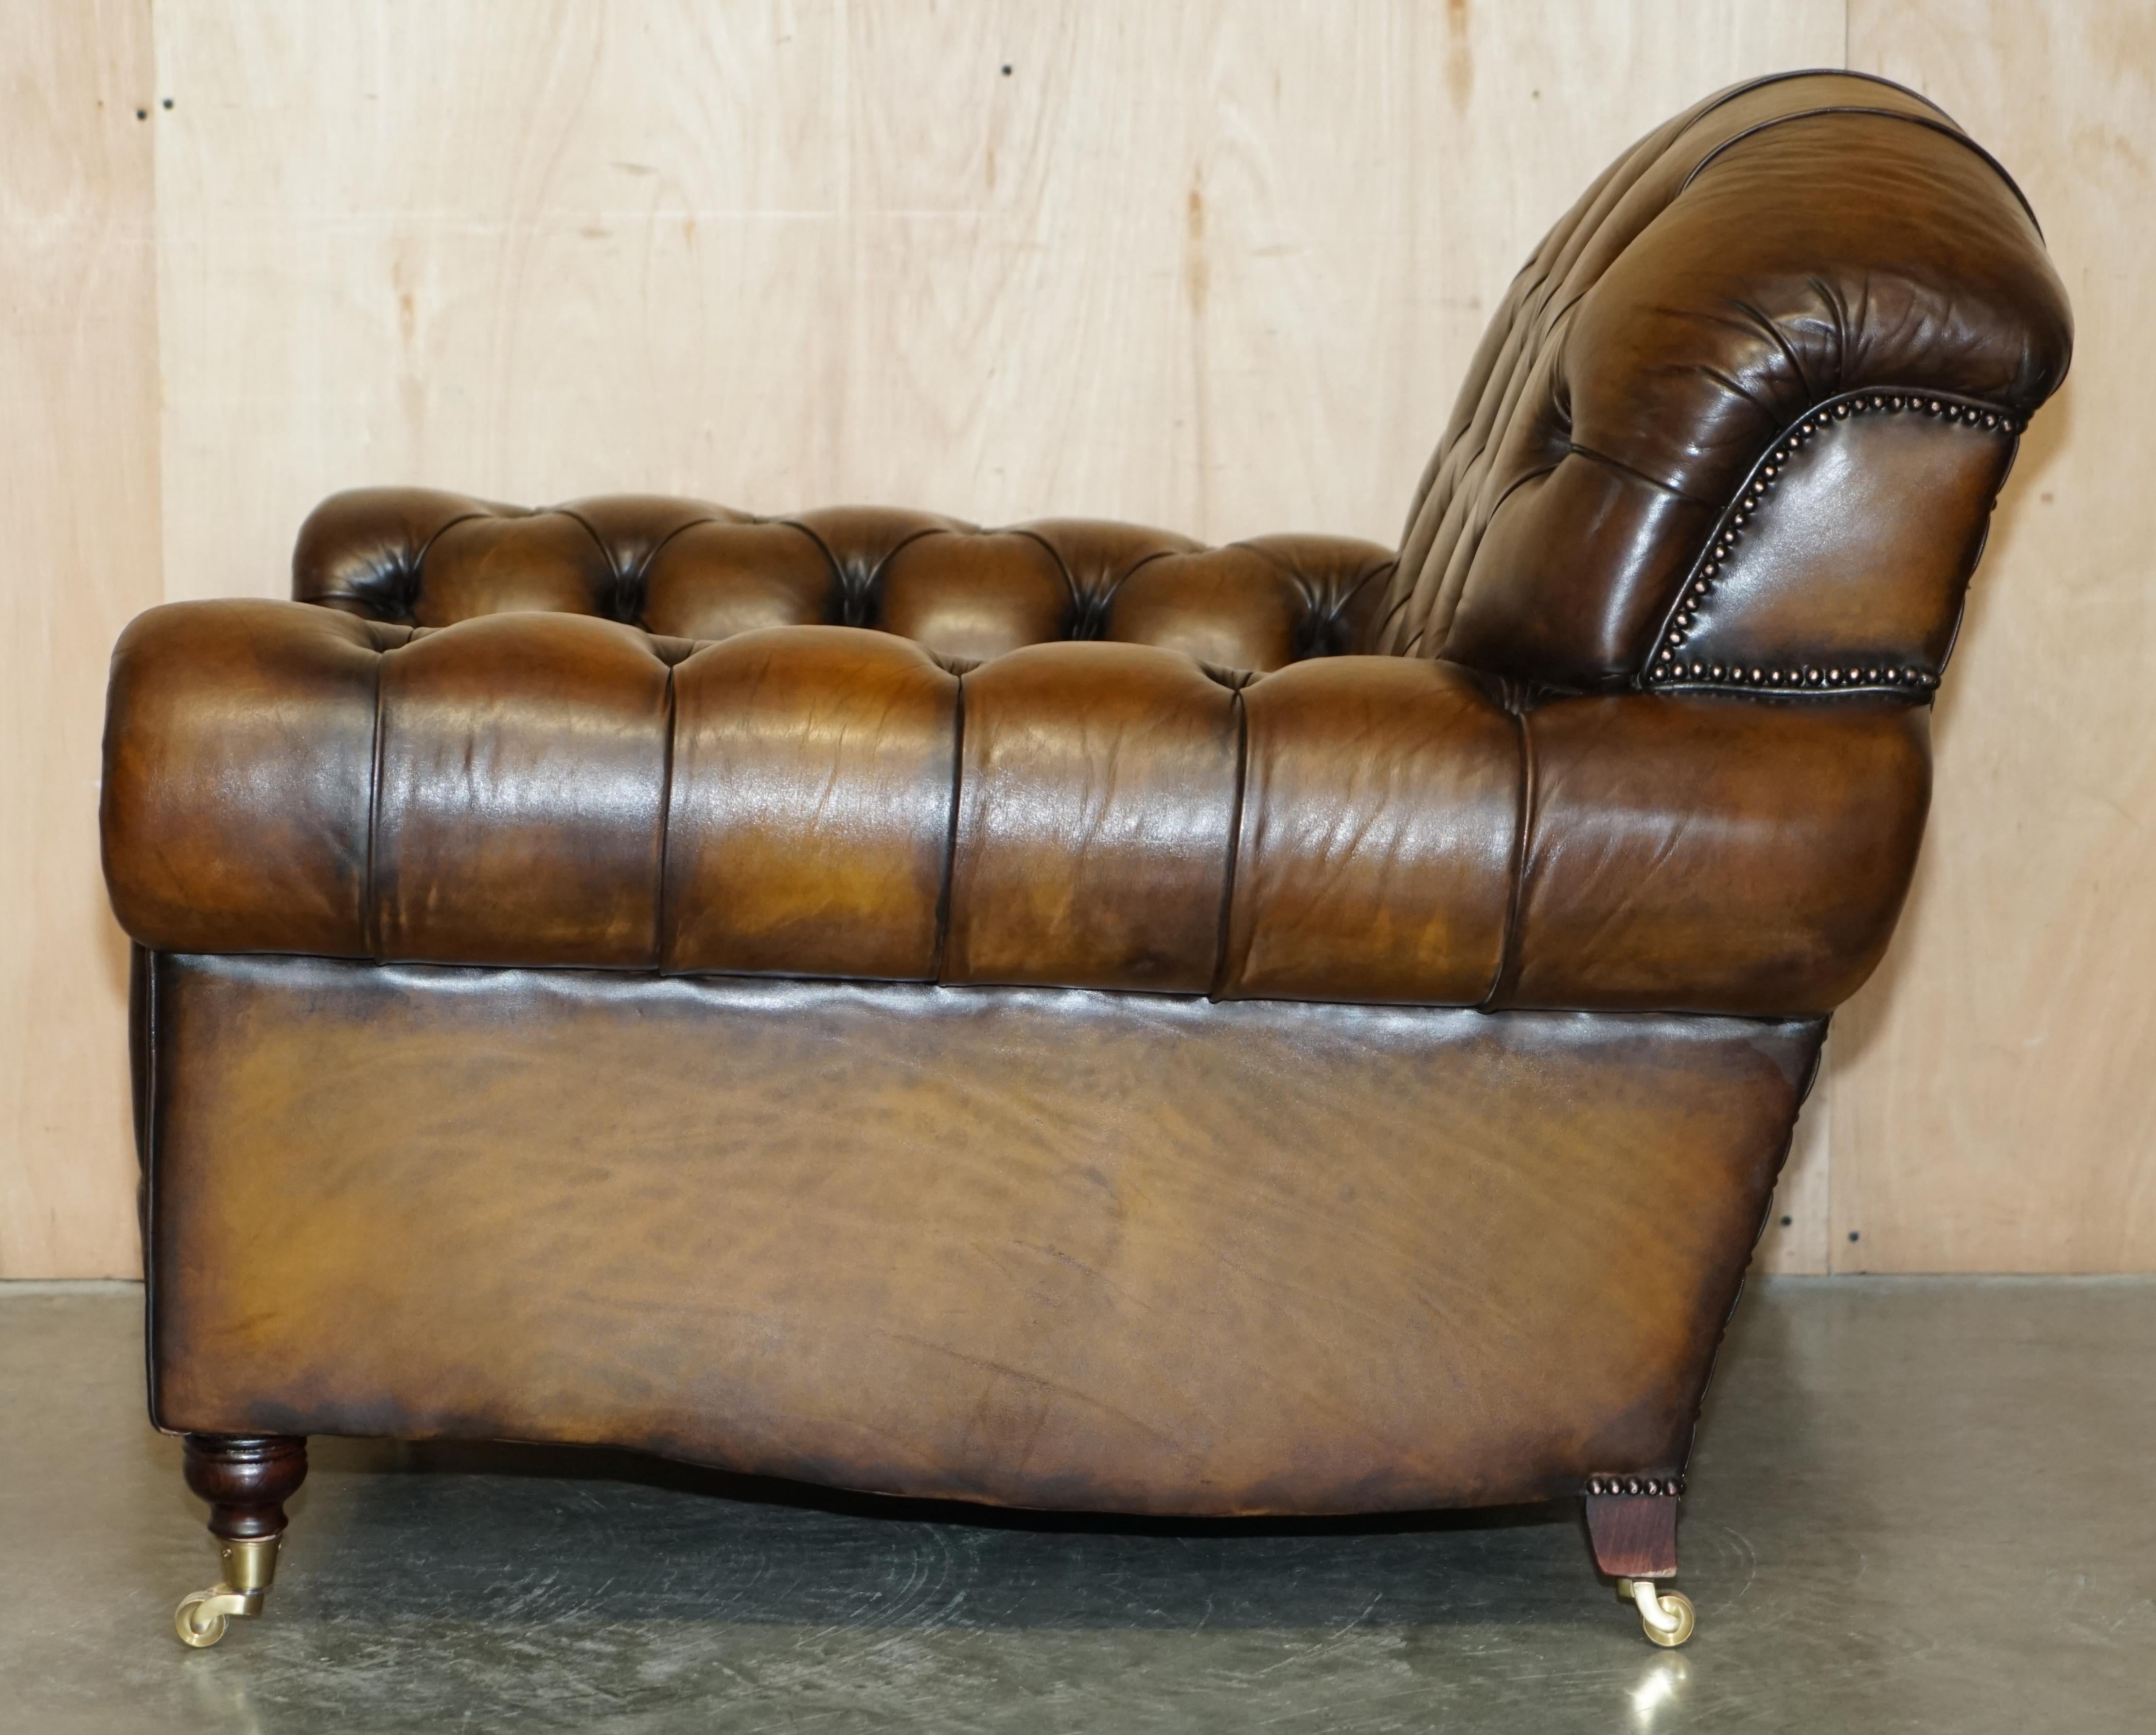 PAIR OF FULLY RESTORED GEORGE SMiTH BULGARU BROWN LEATHER CHESTERFIELD ARMCHAIRS For Sale 12